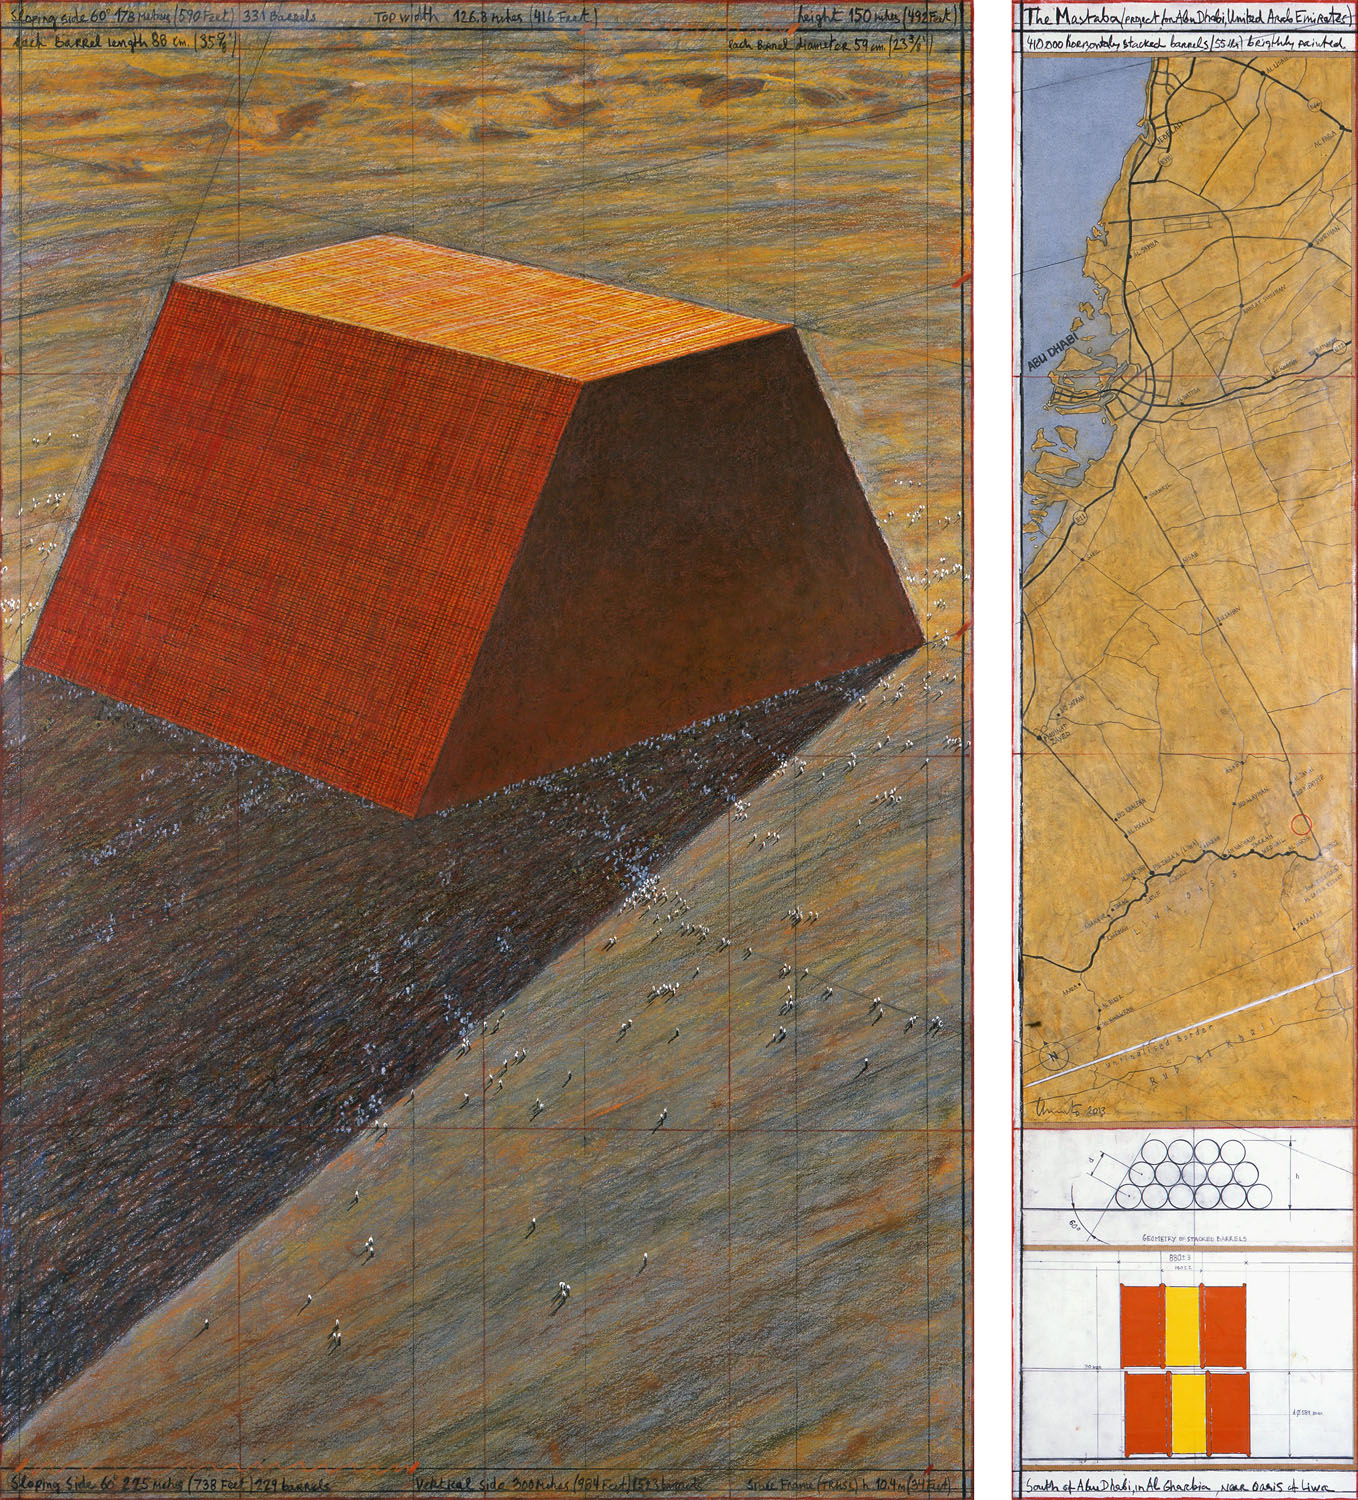 Christo, The Mastaba (Project for Abu Dhabi, United Arab Emirates), Drawing 2013, in two parts 165 x 106.6 cm and 165 x 38 cm, pencil, charcoal, wax crayon, pastel, hand-drawn technical data and map, enamel paint, wash and tape. Photo: André Grossmann © 2013 Christo